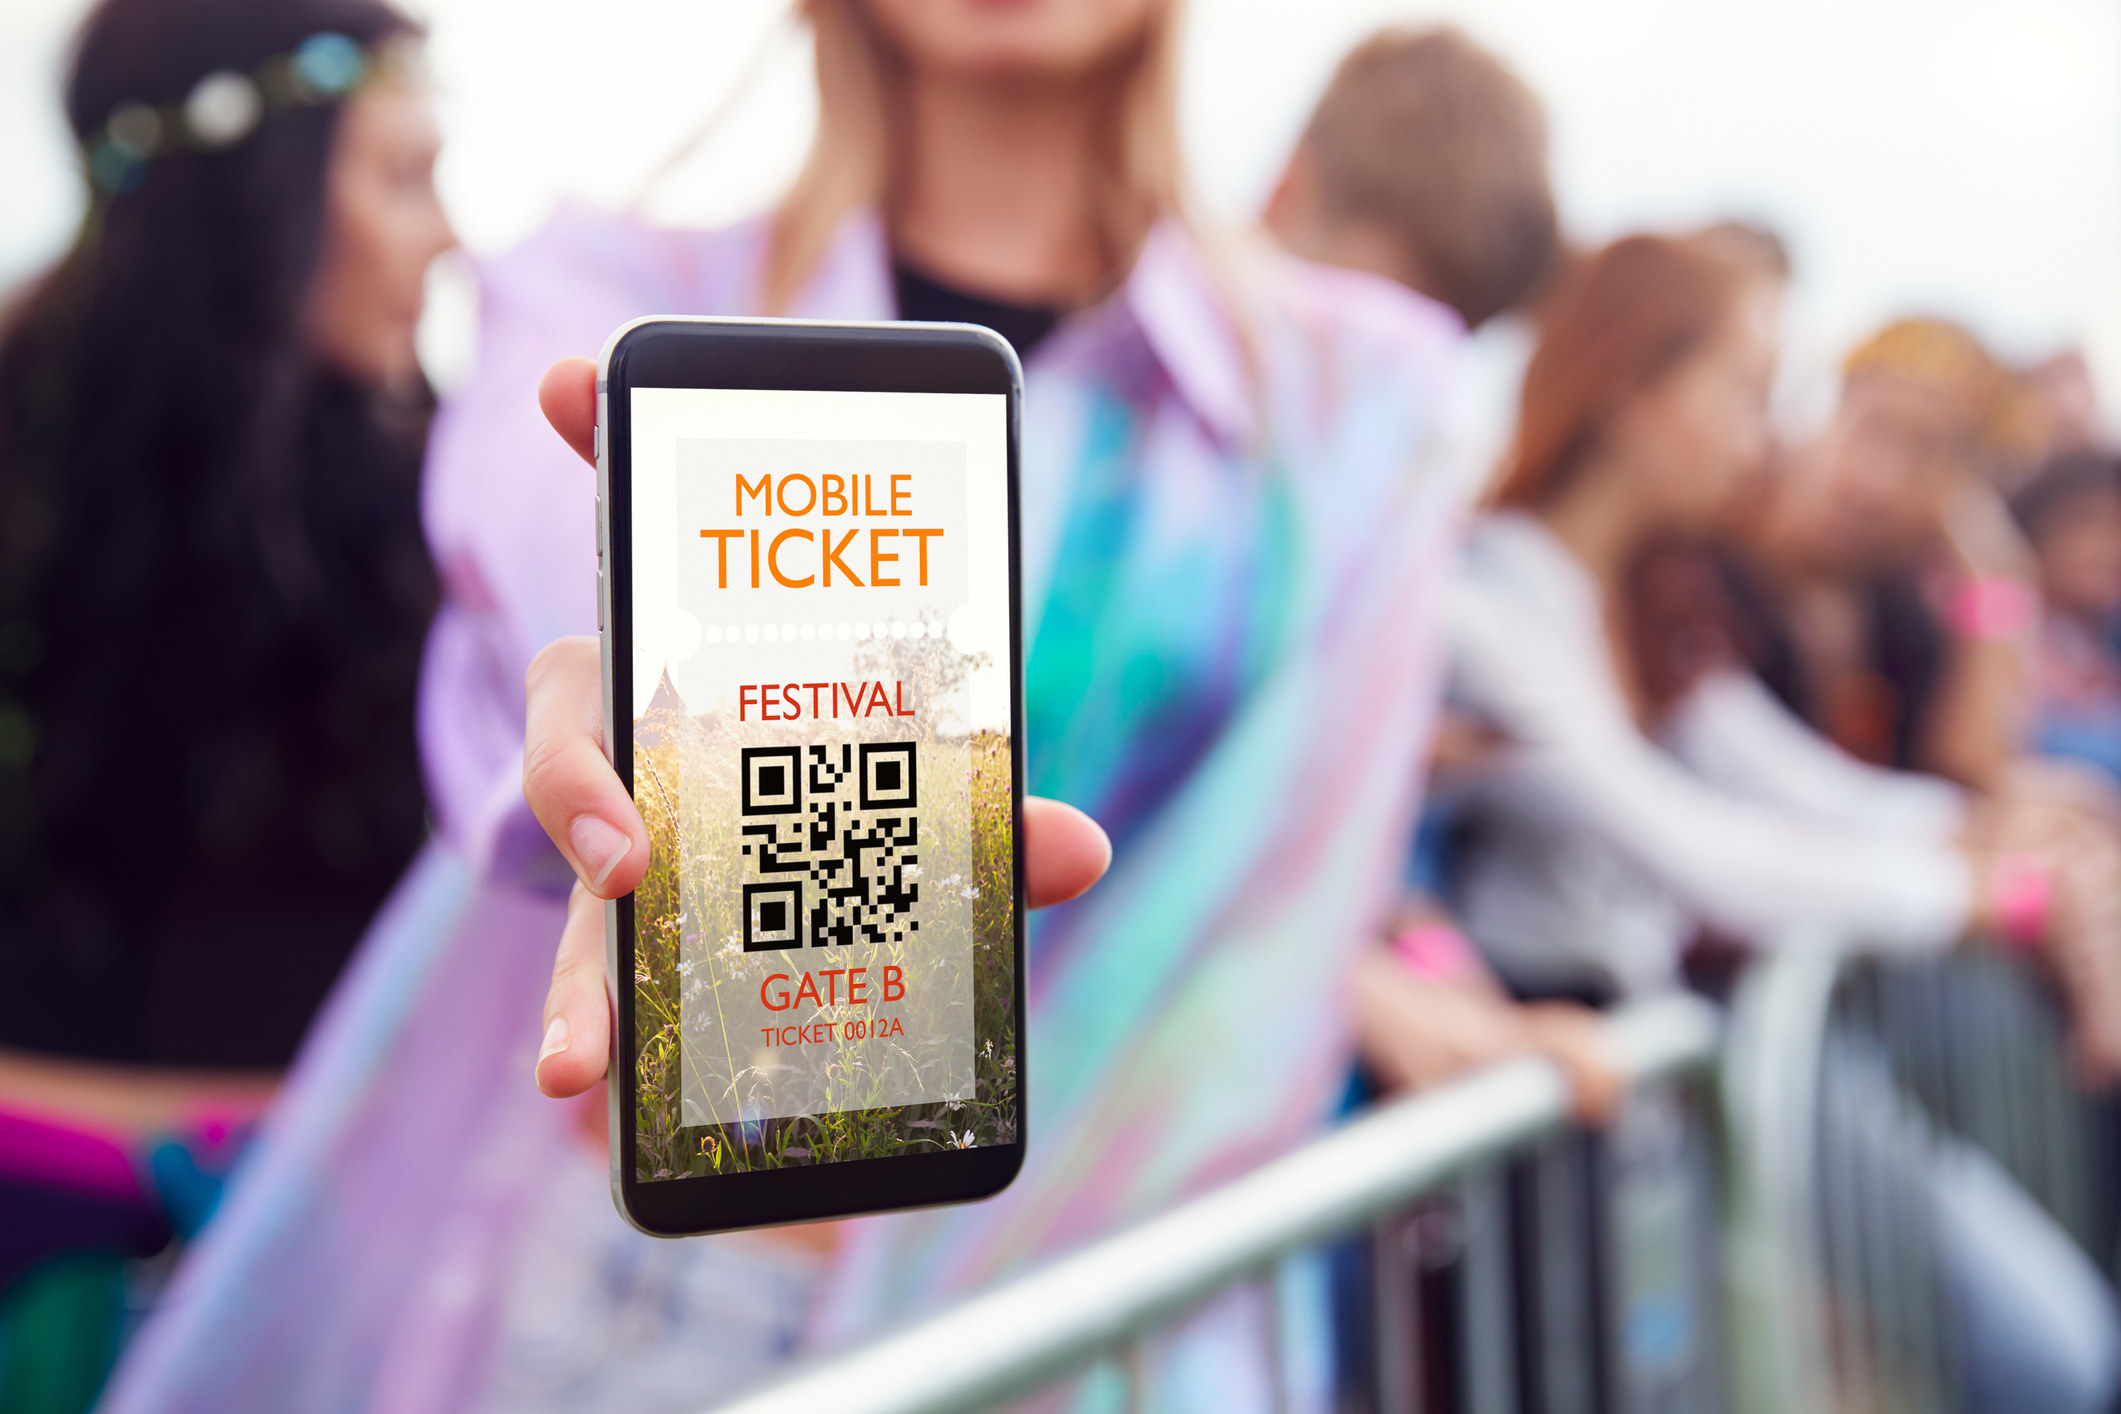 Someone showing a mobile ticket to a festival on their phone